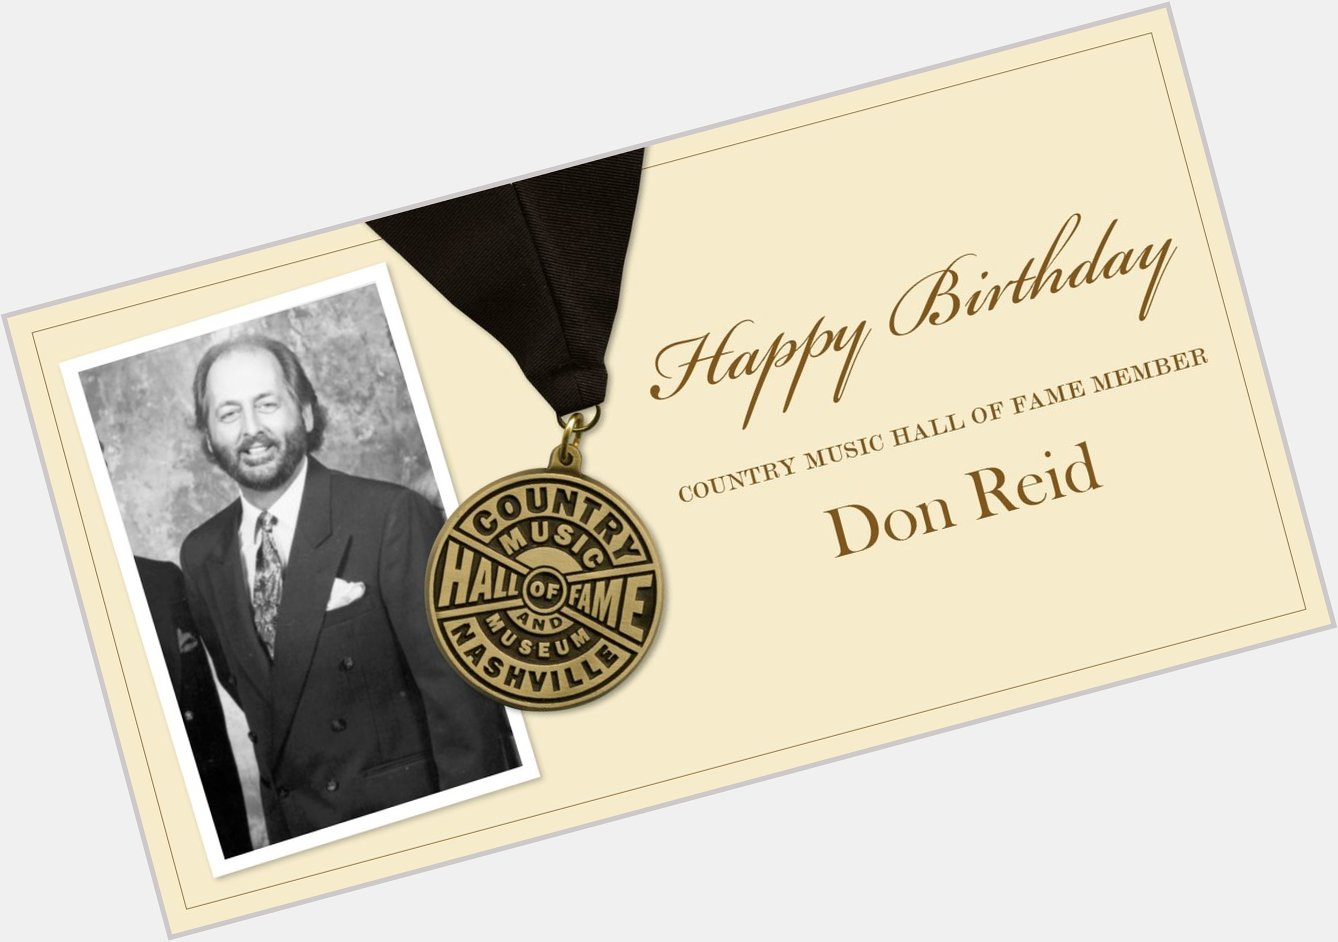 Help us wish CMHOF member Don Reid, of the Statler Brothers, a very happy birthday! 